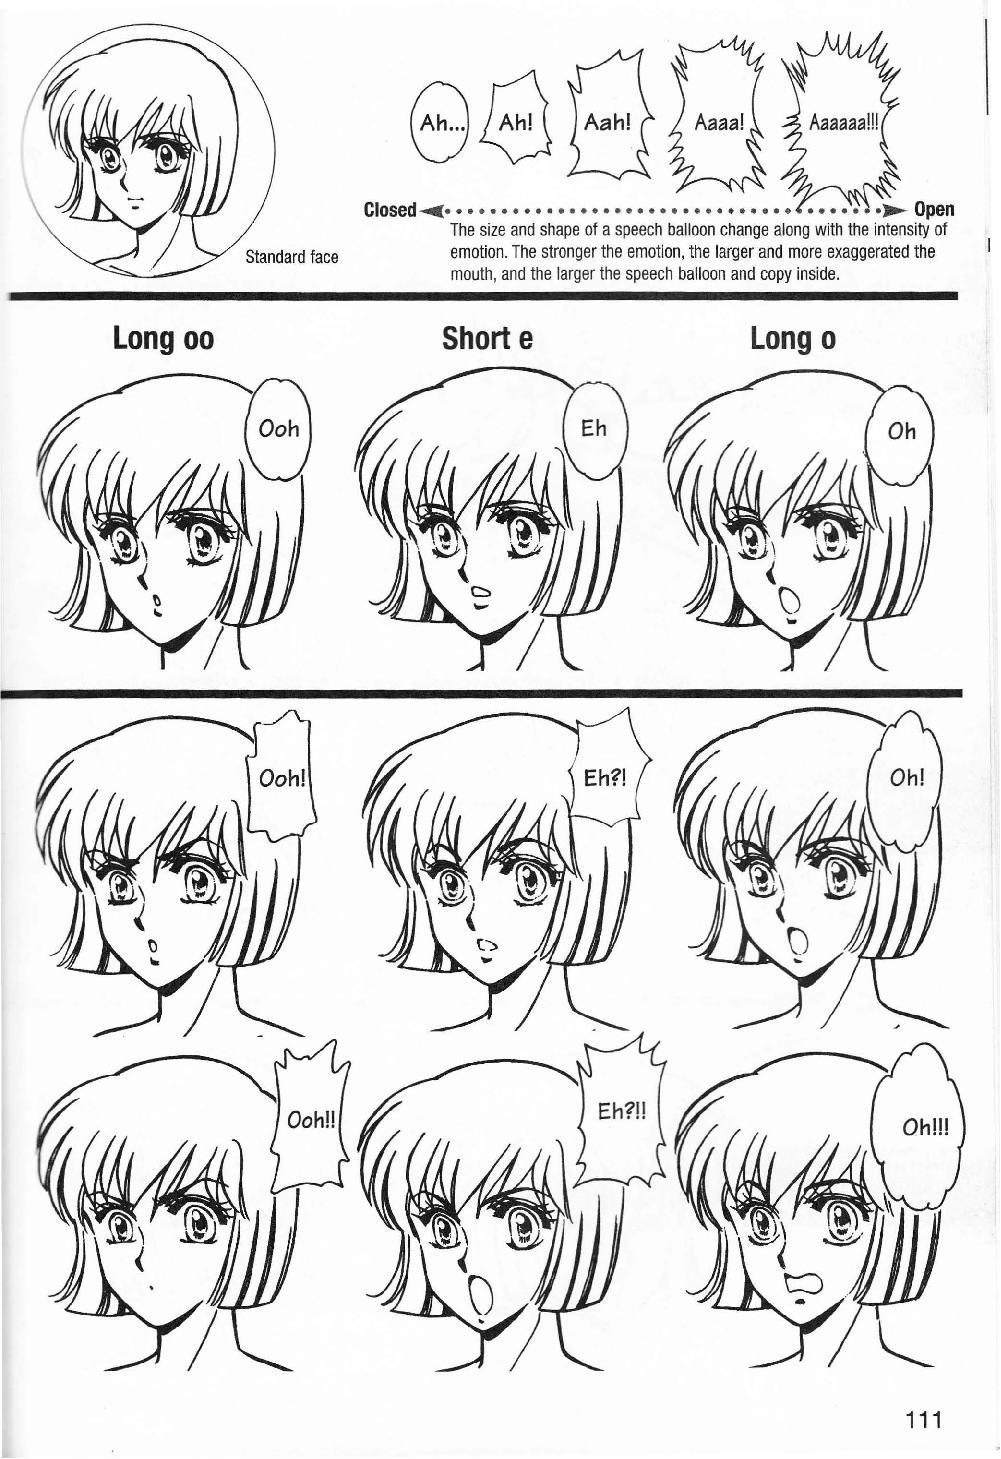 More How to Draw Manga Vol. 2 - Penning Characters 112